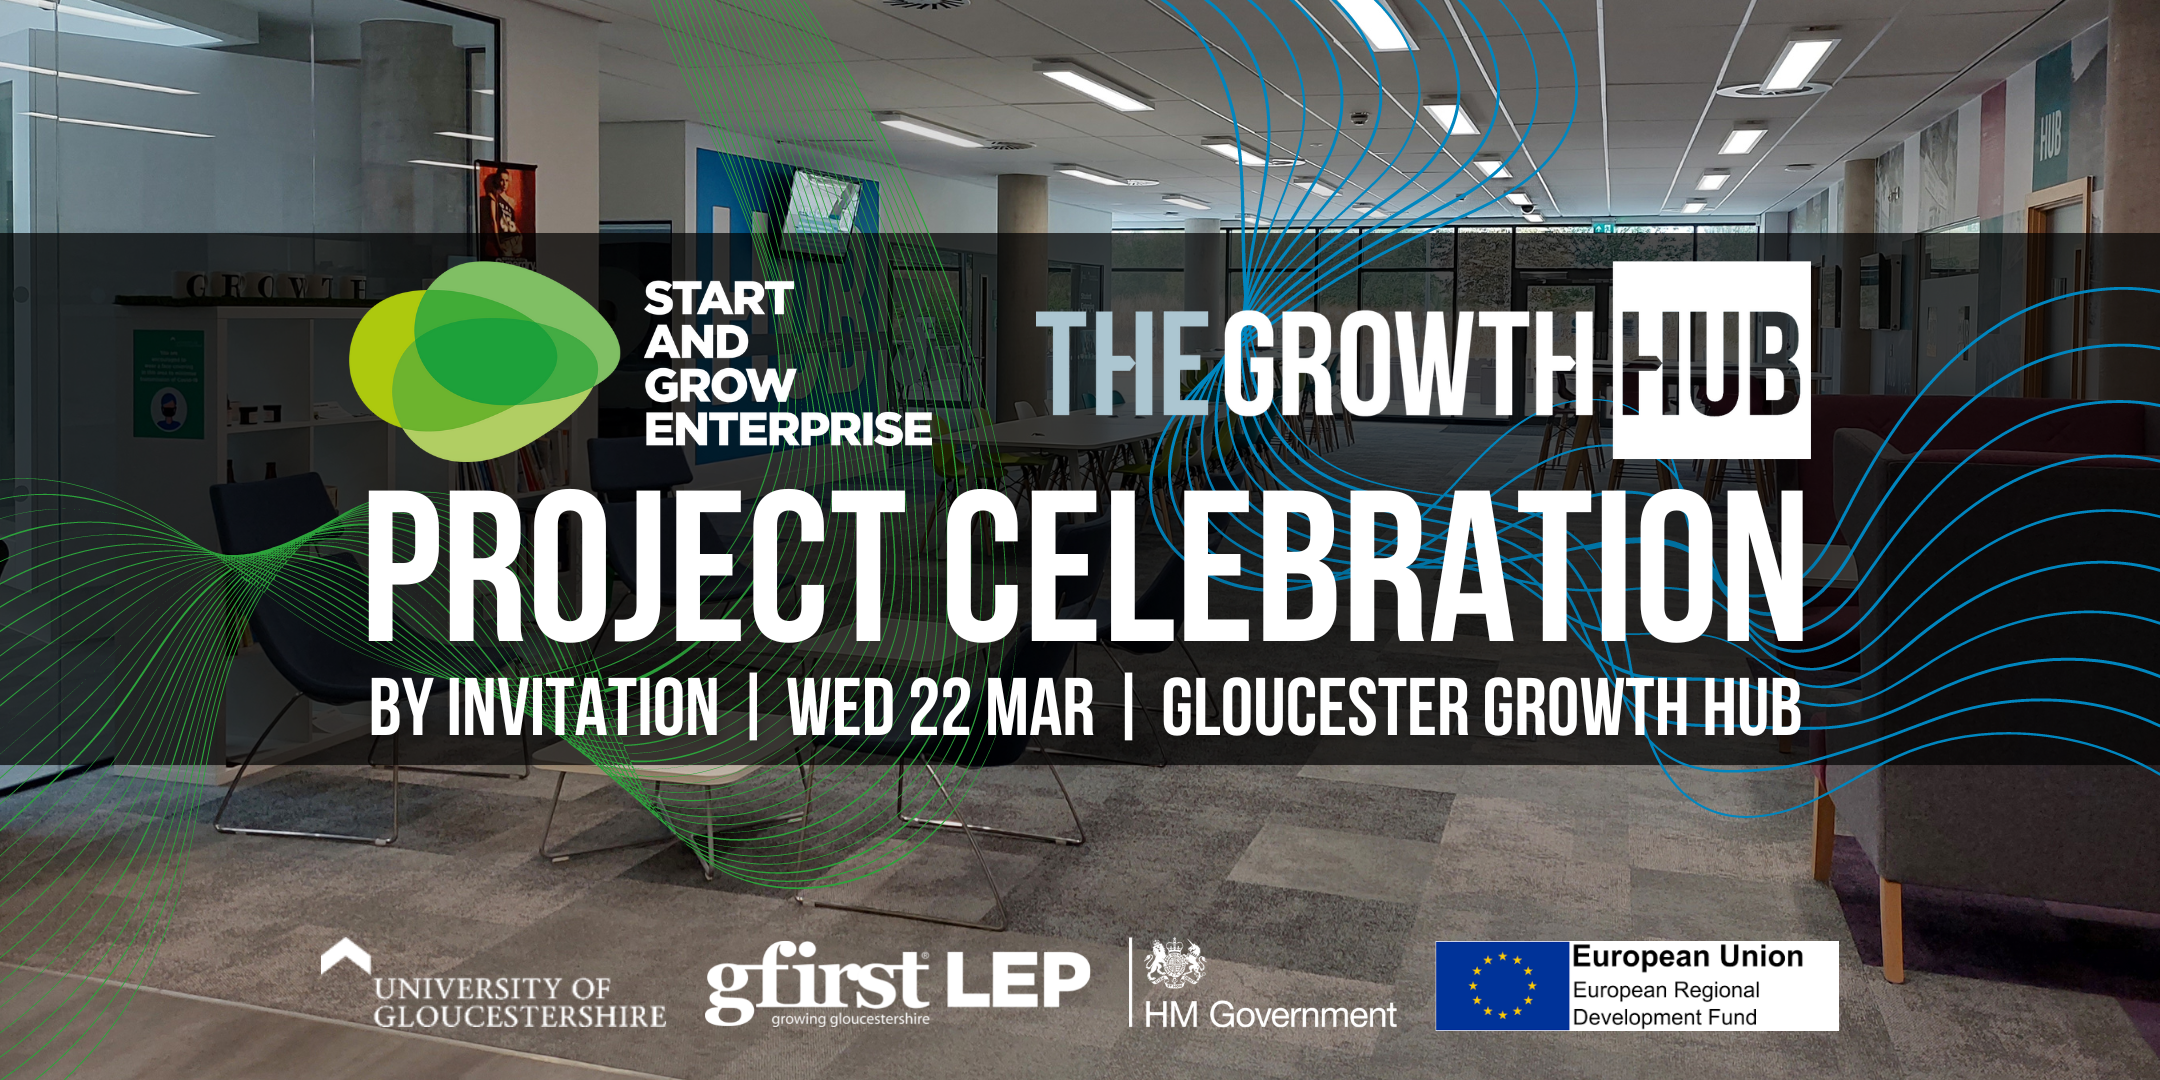 Celebration event being held to mark achievements of Start and Grow Enterprise and the Gloucester Growth Hub projects